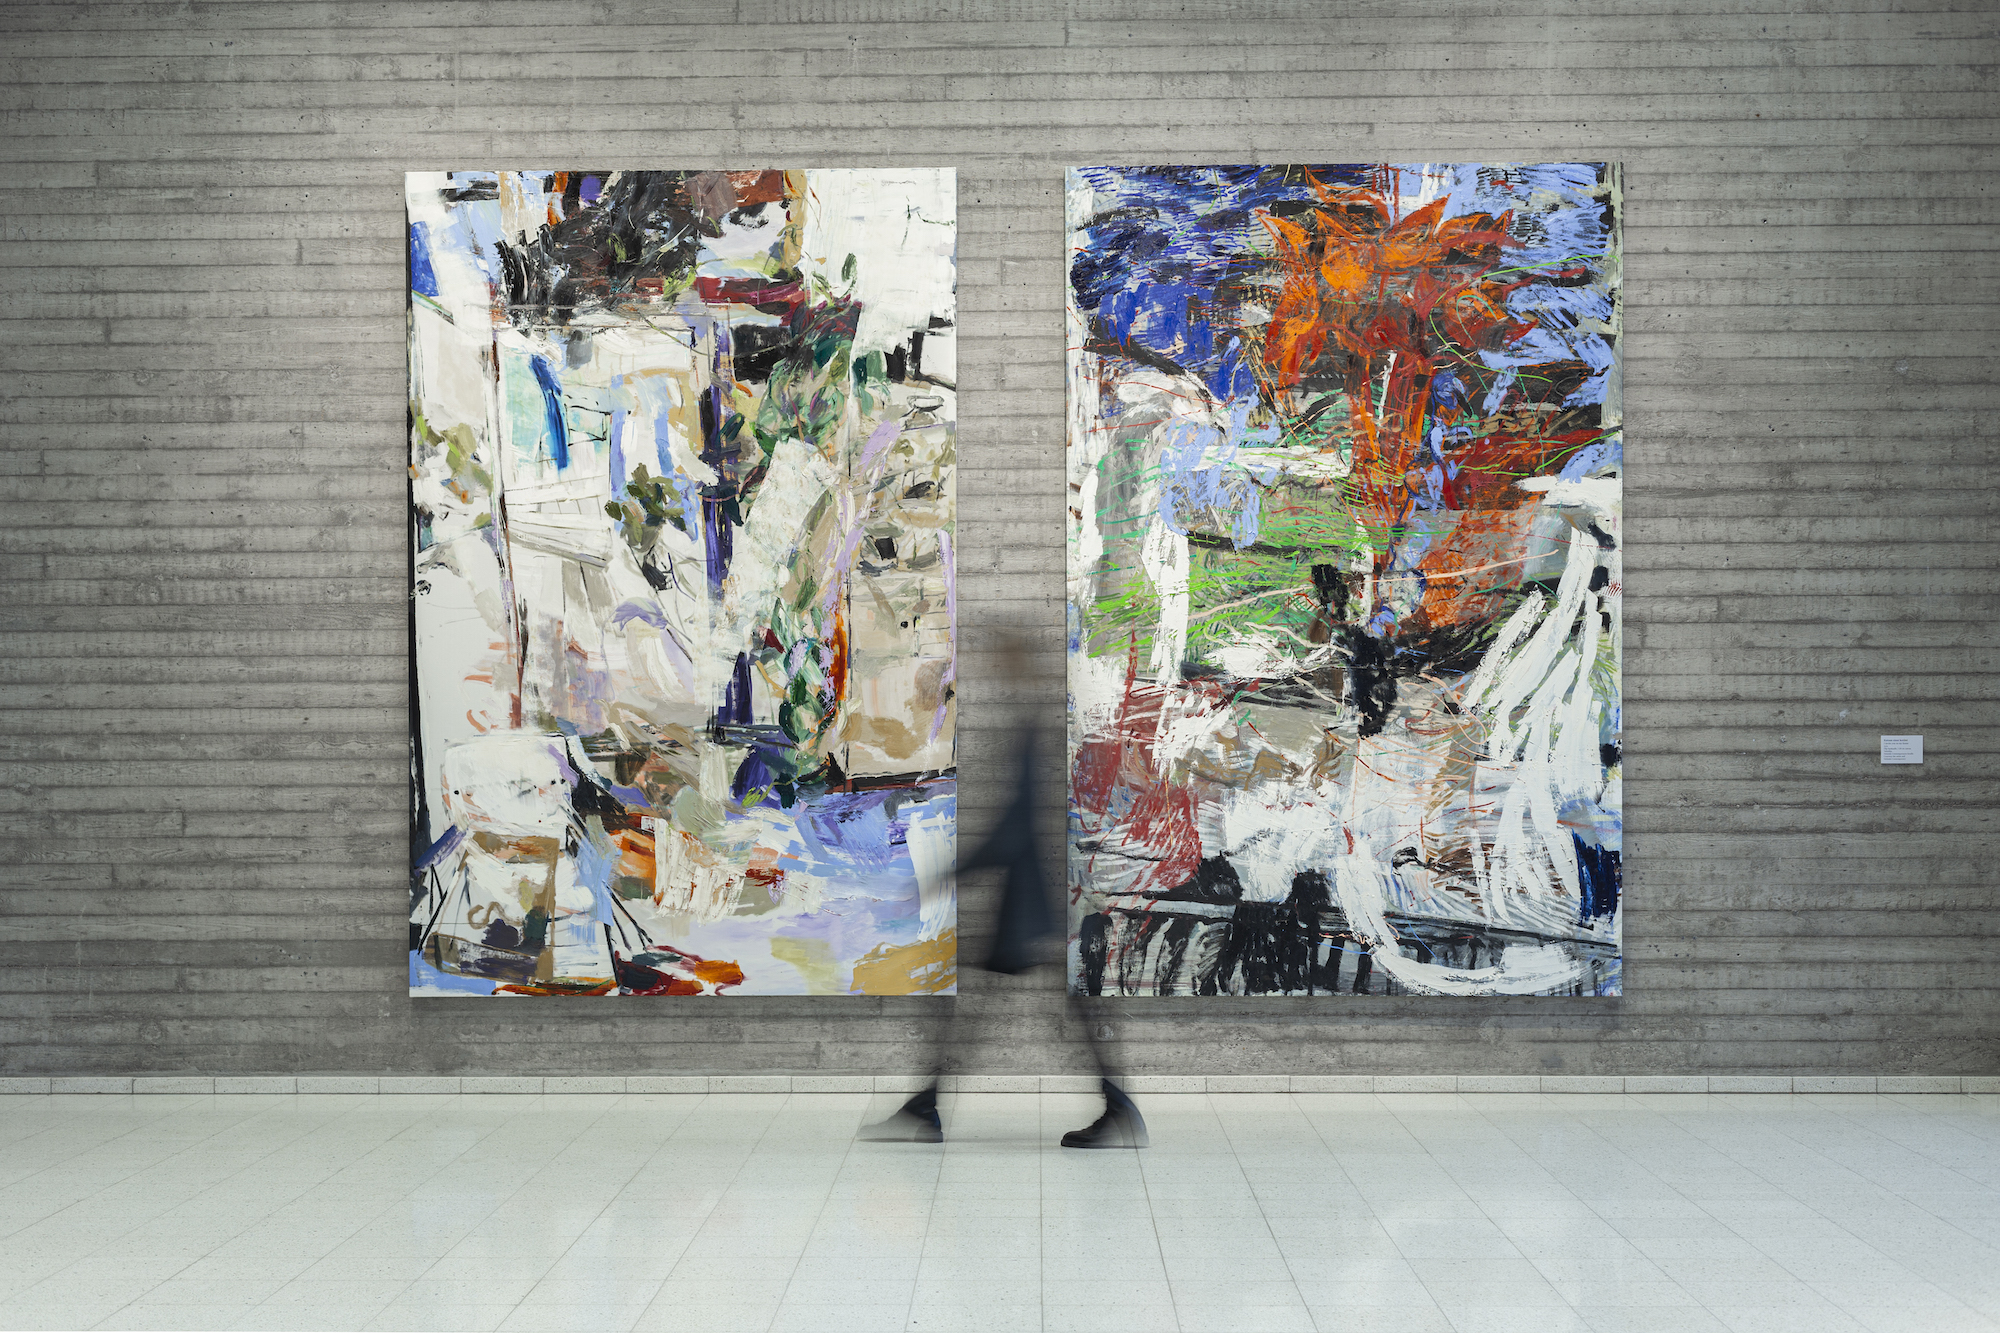 Two large colorful abstract paintings are set up against a grey wall. A blurry shape of a person is walking past the paintings, situated between them.